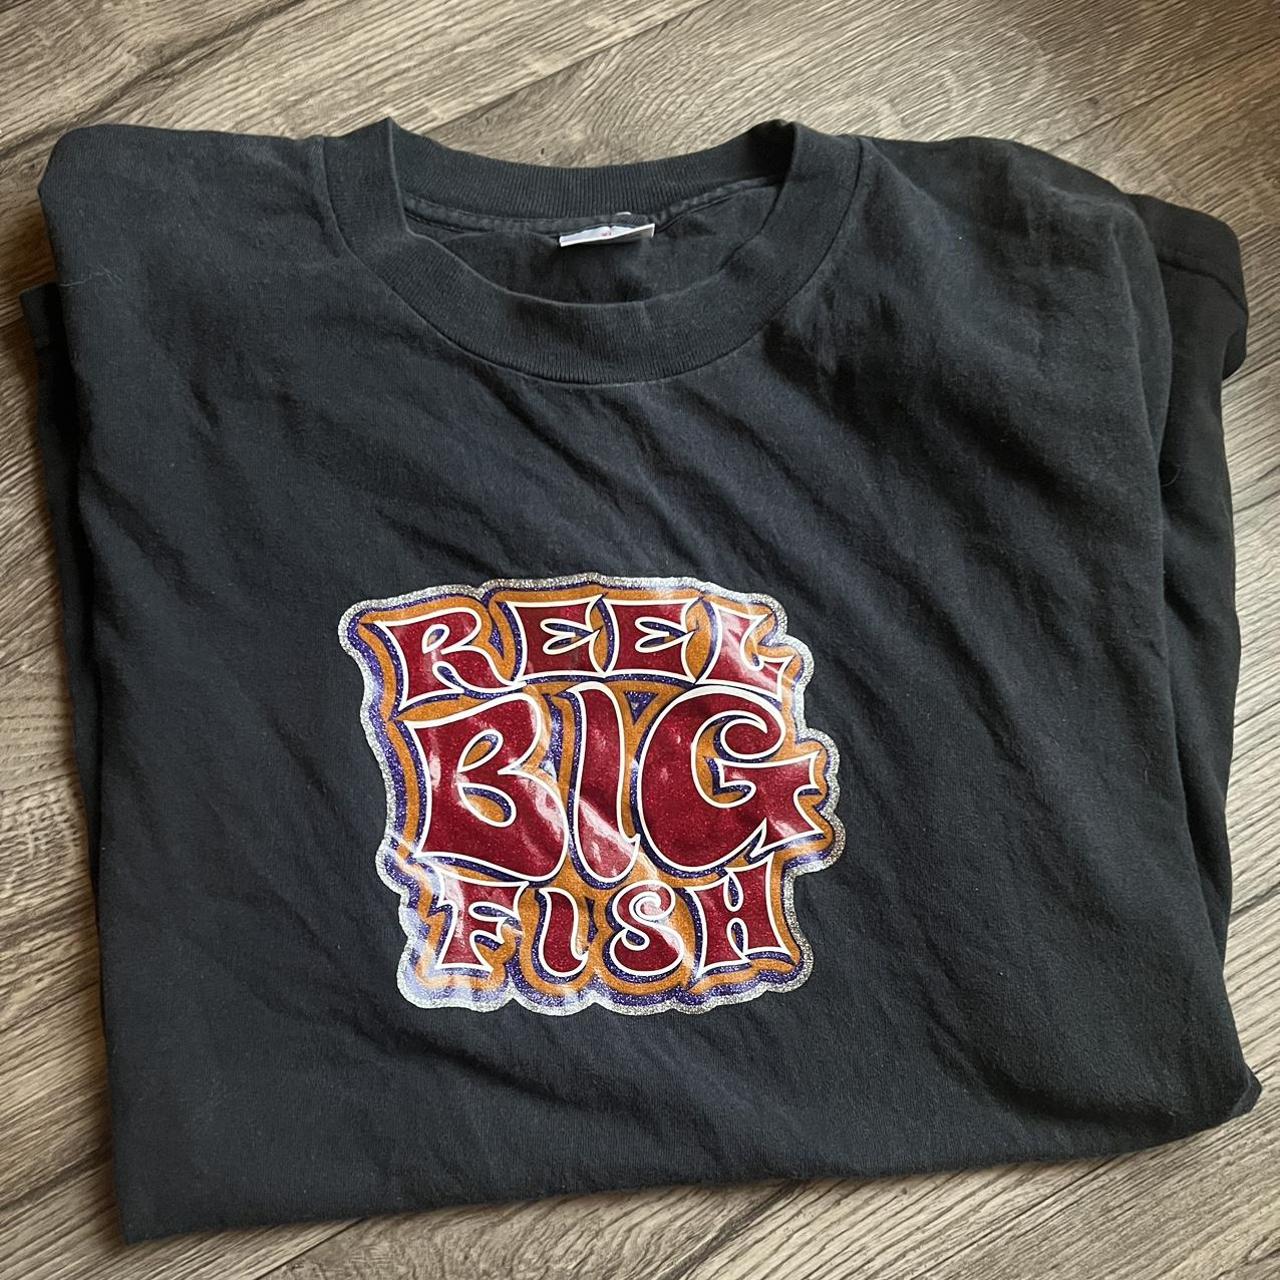 Vintage 90’s REEL BIG FISH XL T-Shirt, Made in